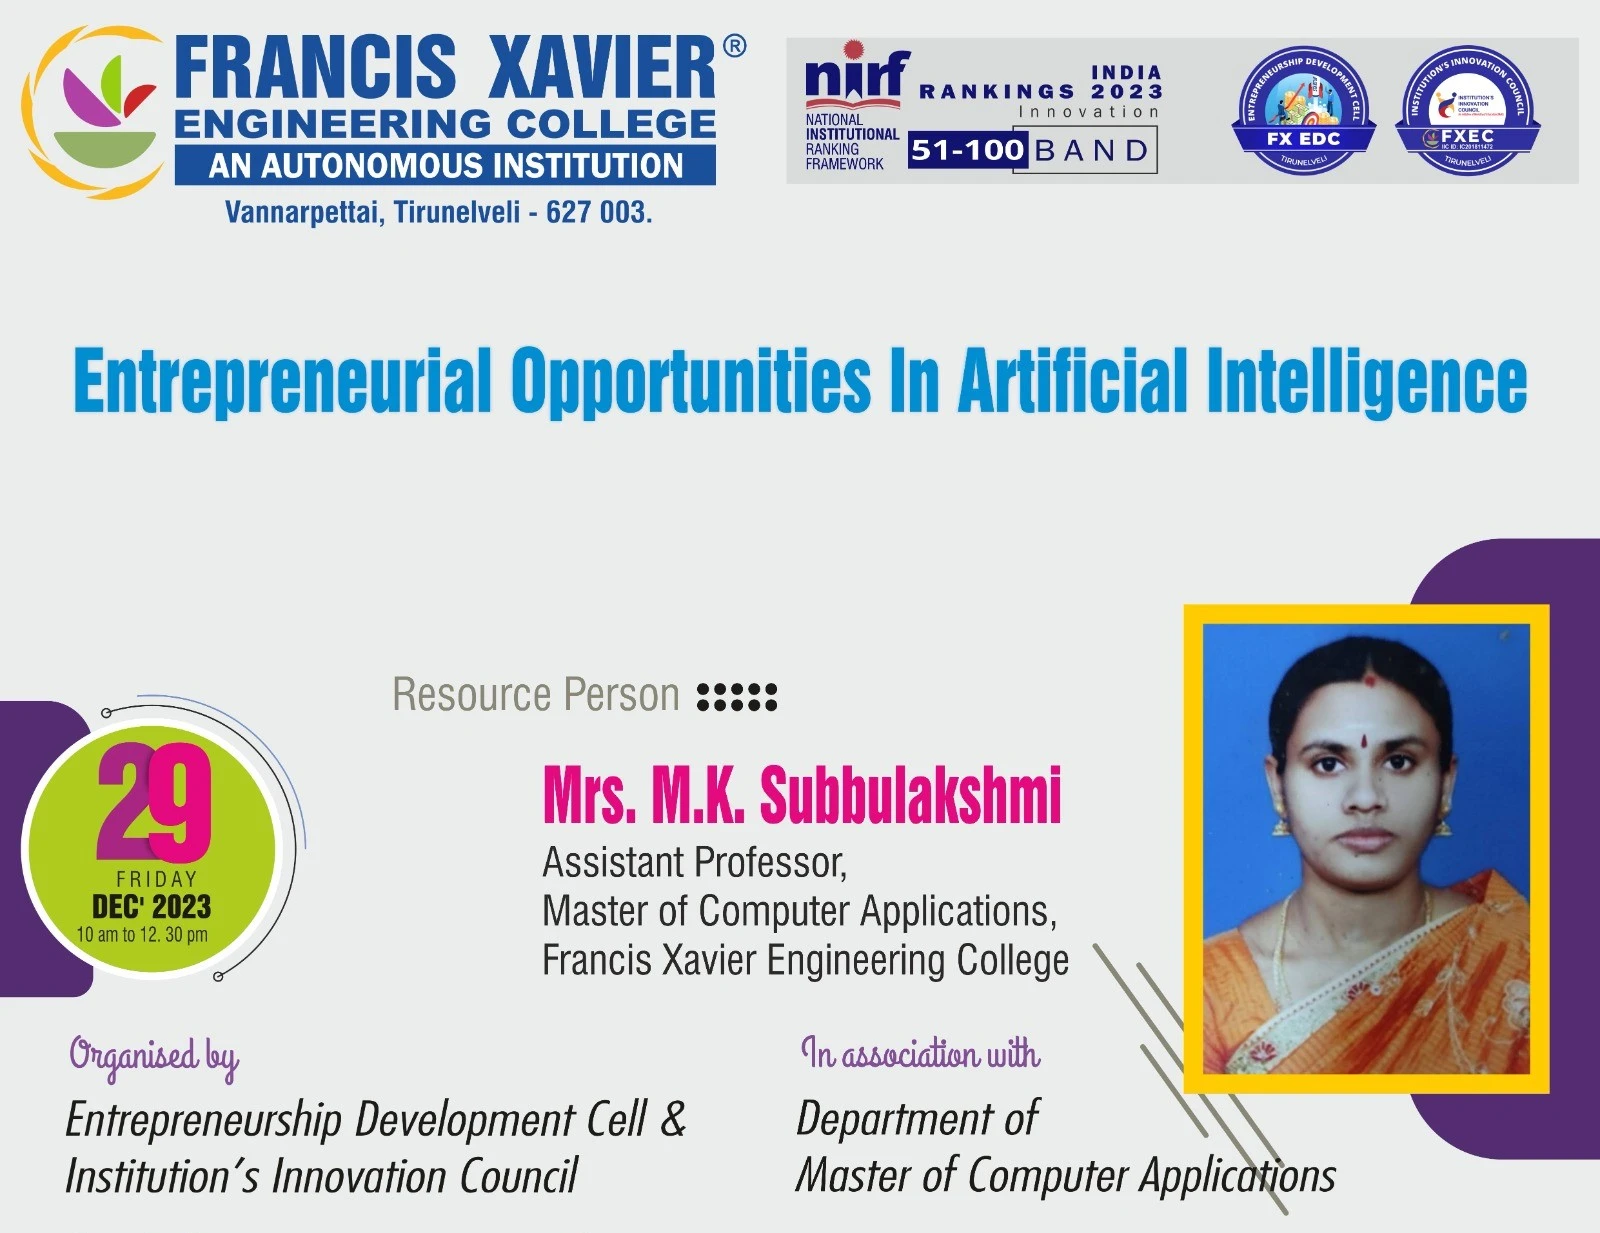 Entrepreneurial Opportunities in Artificial Intelligence